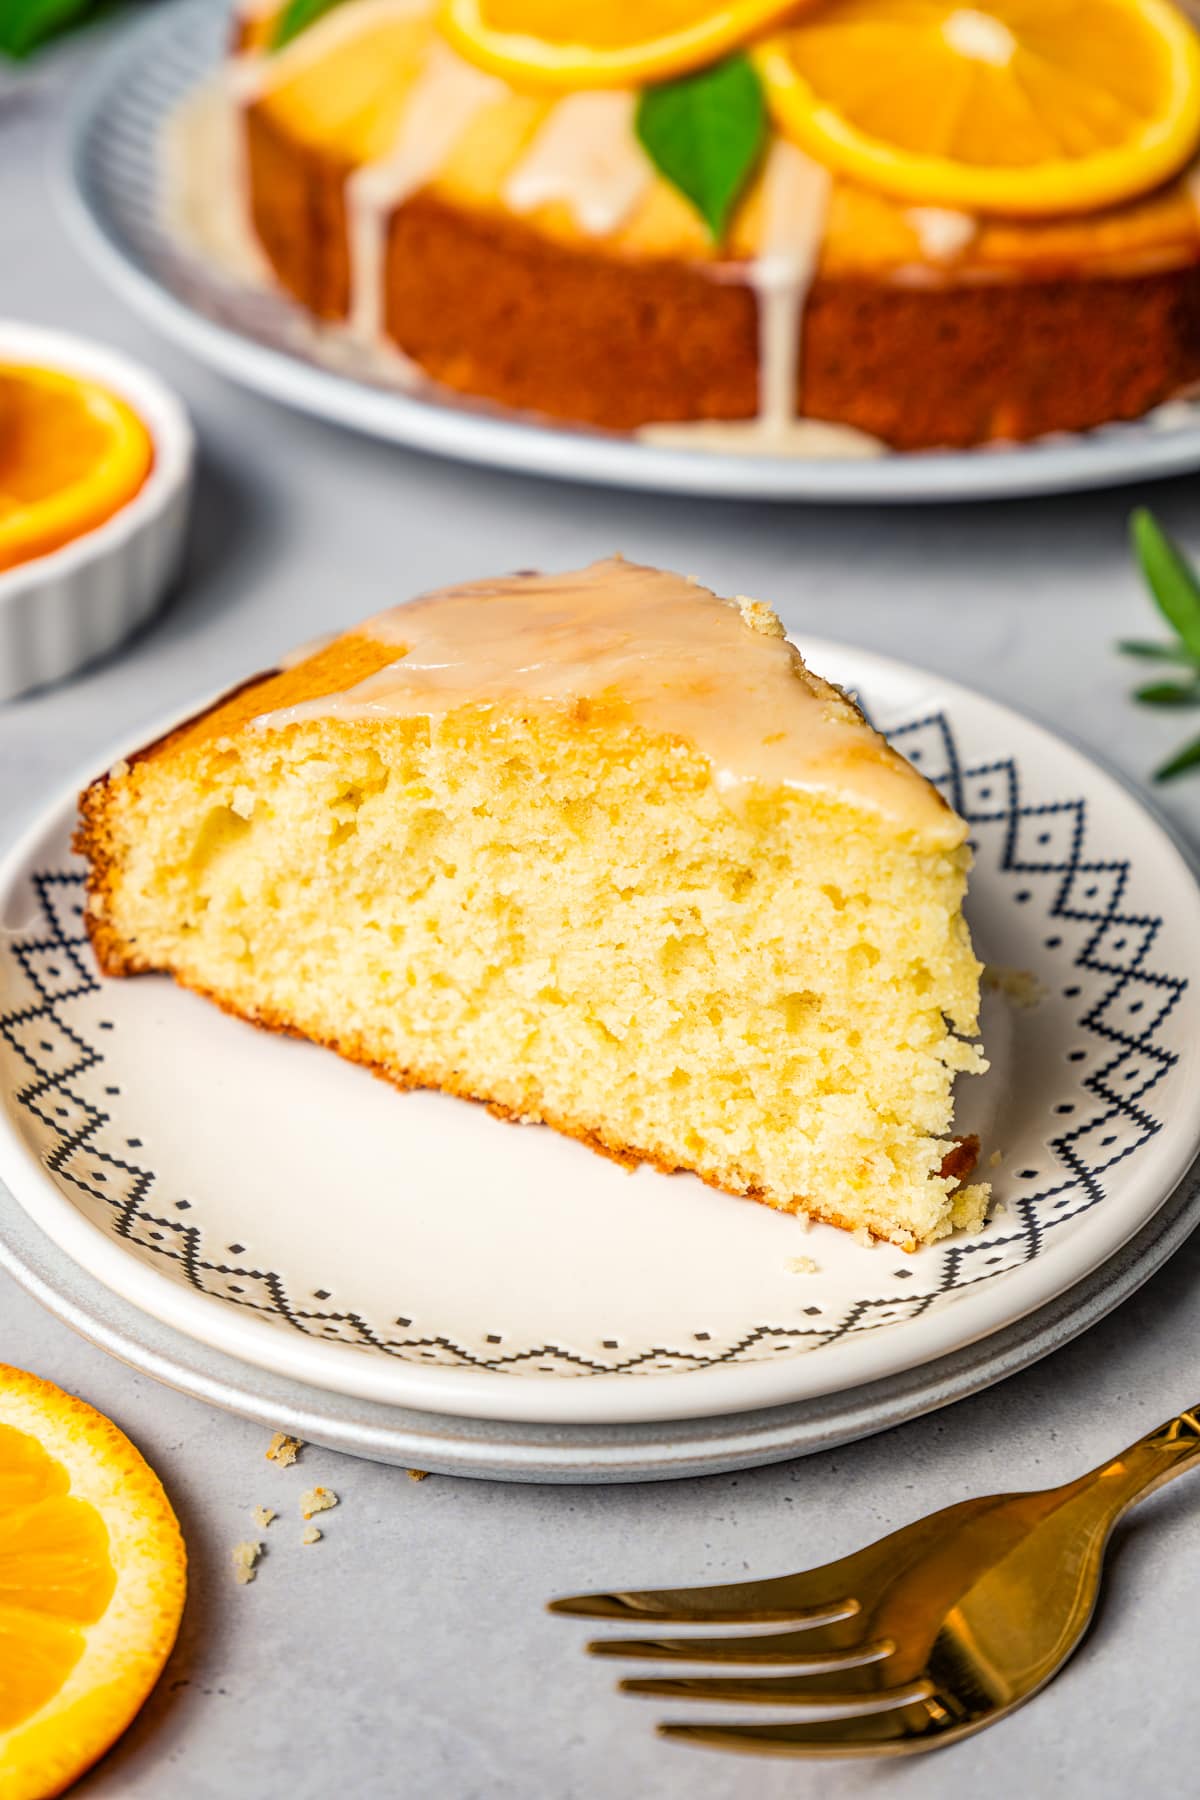 Slice of orange cake served on a white plate, with the full cake set in the background.